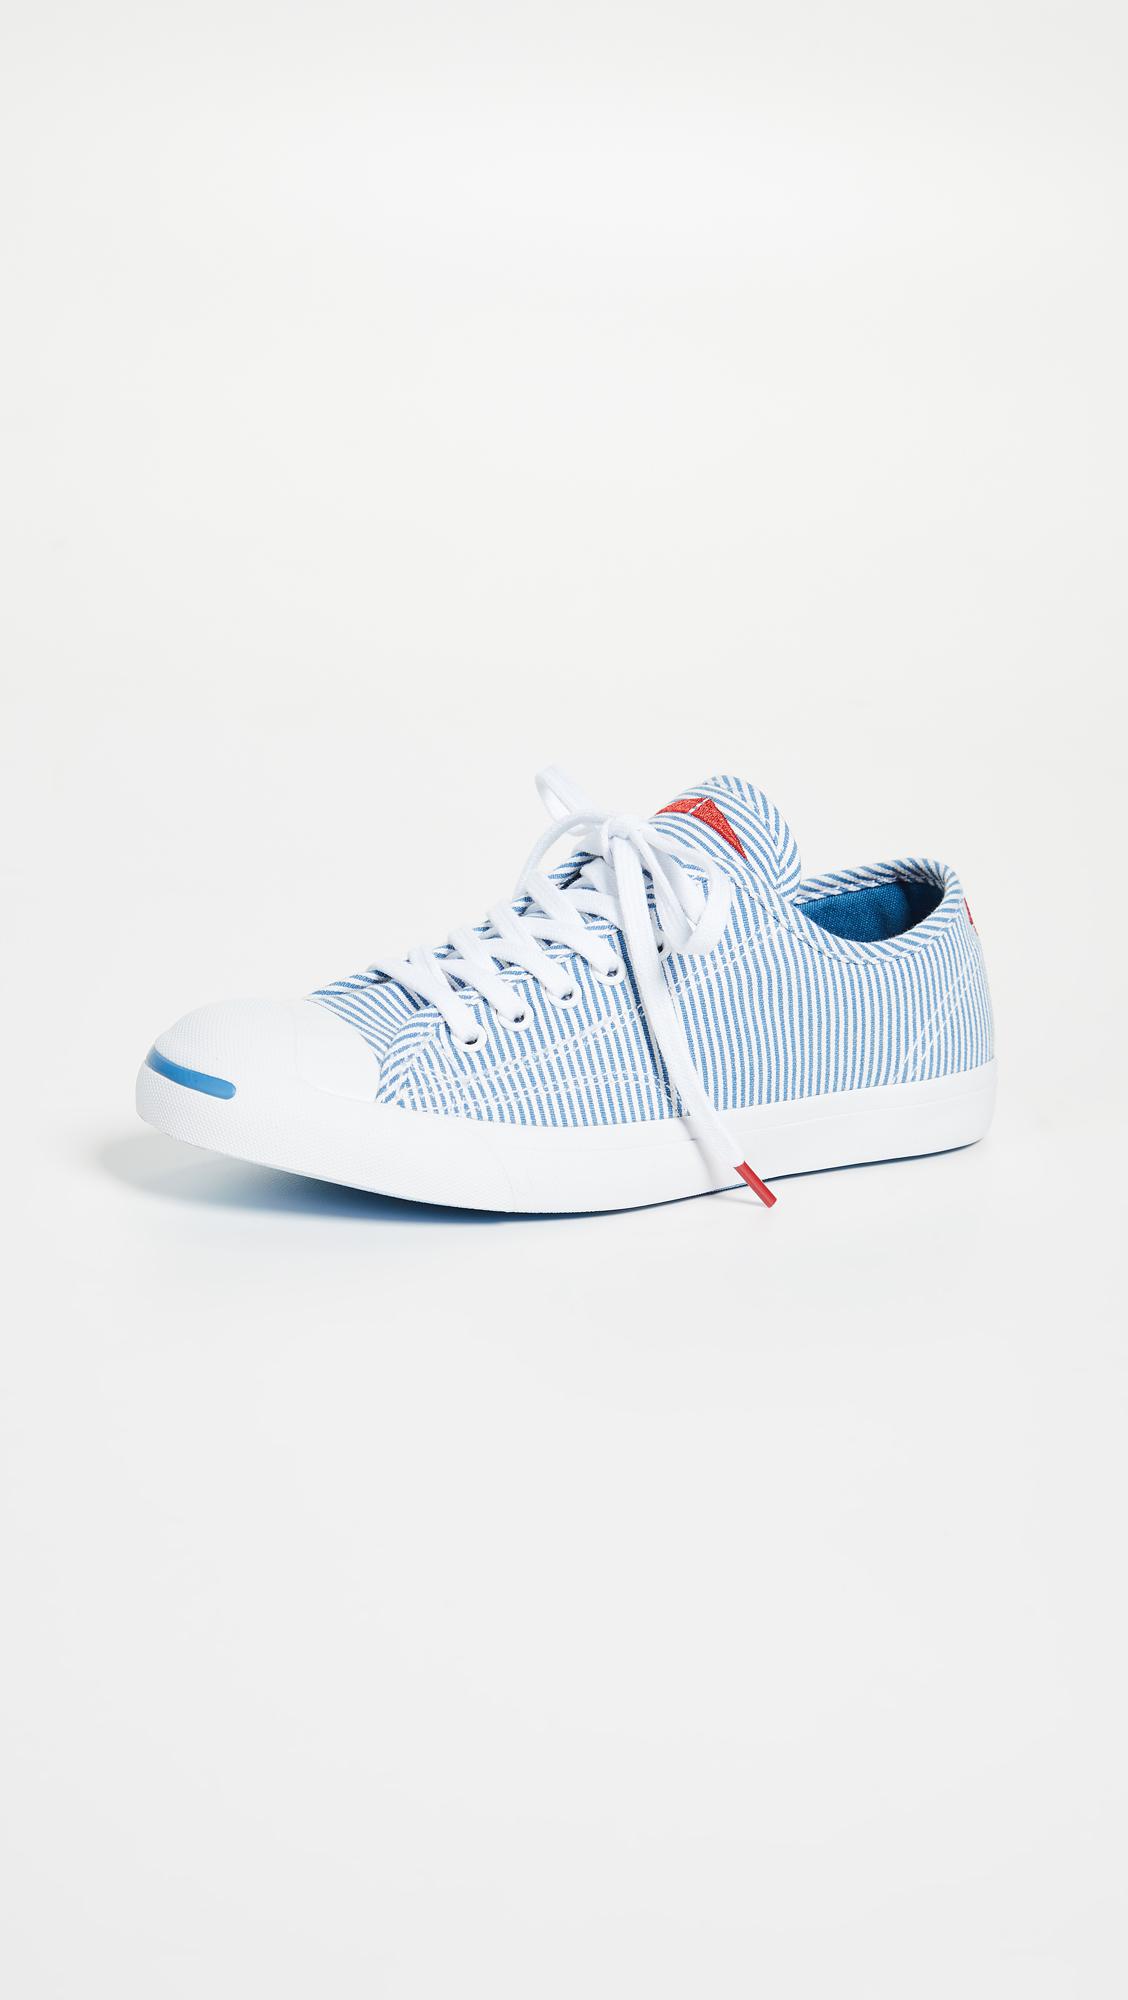 Converse Jack Purcell Striped Sneakers in Blue | Lyst